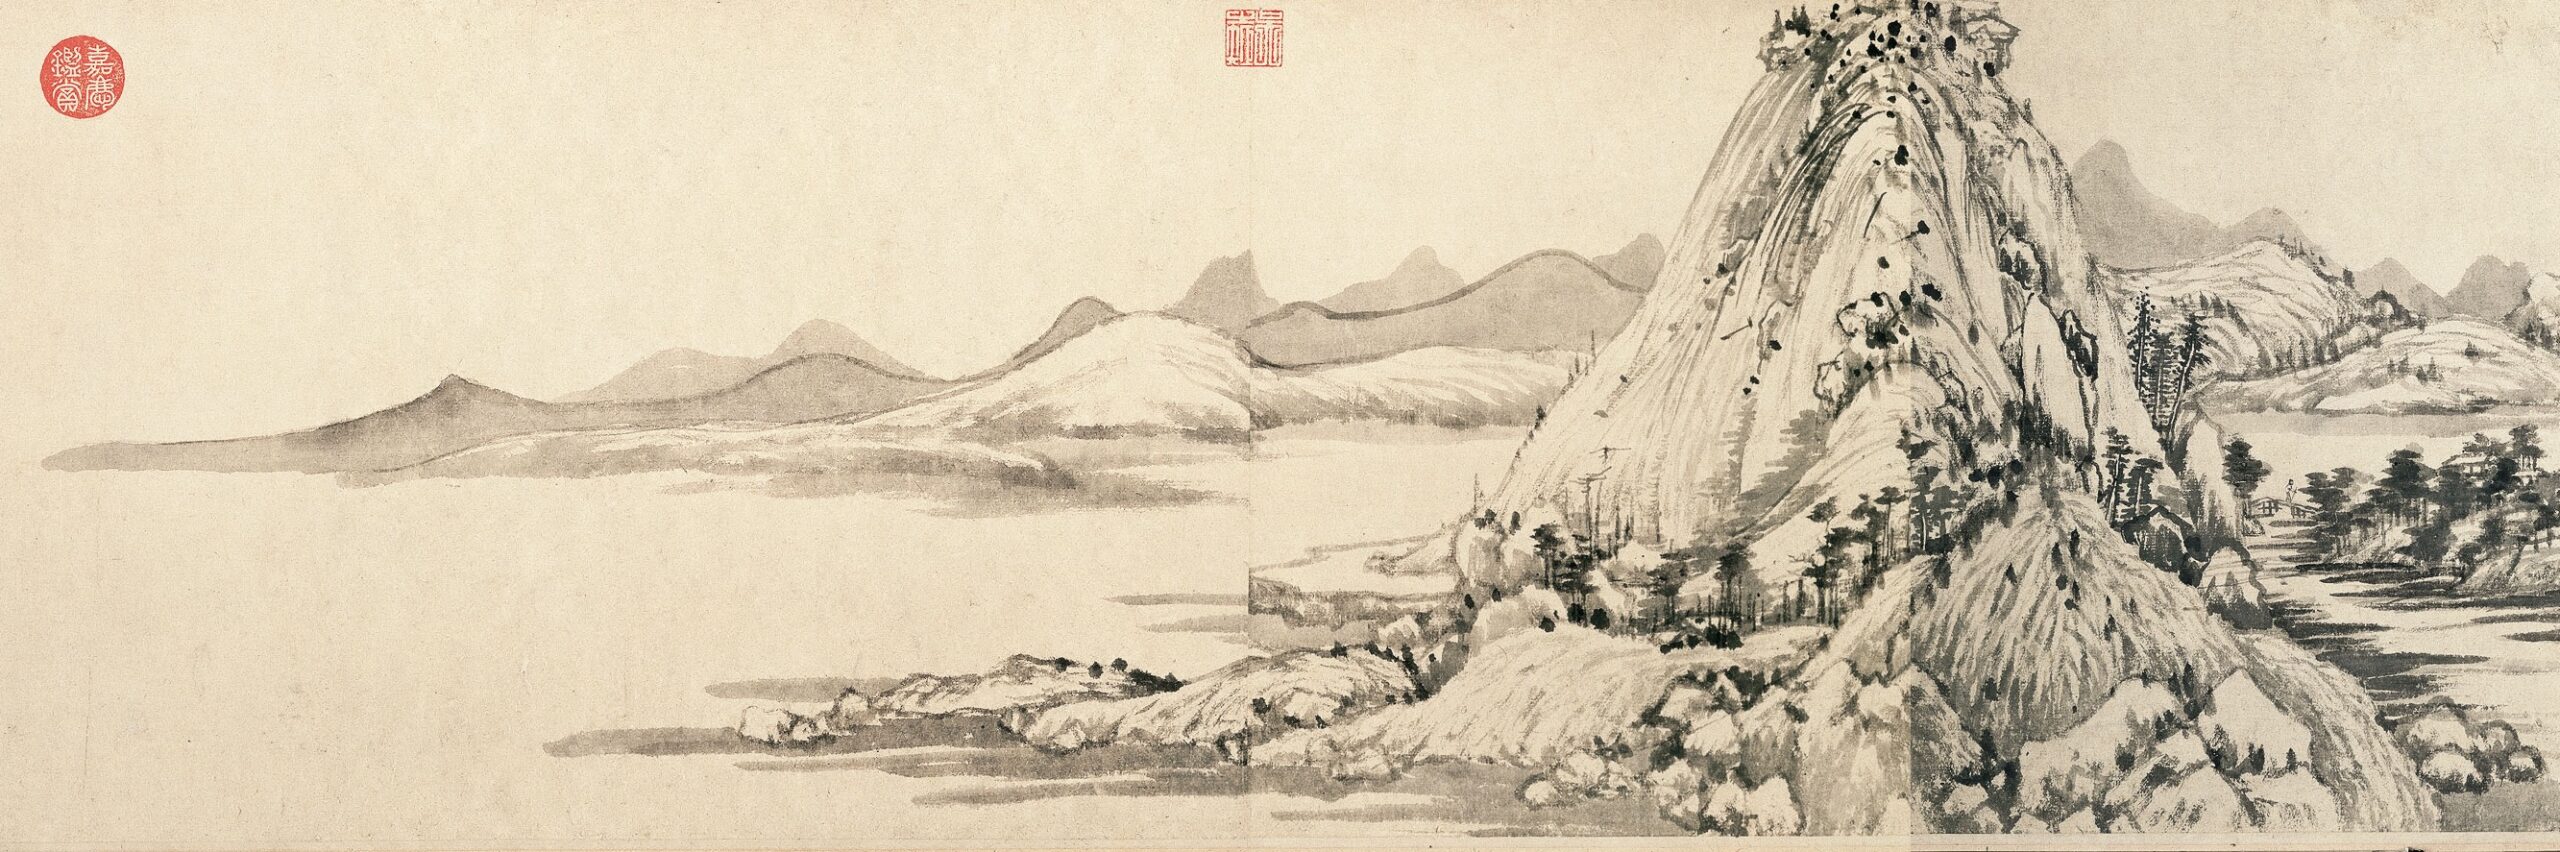 Low-lying mountains and blank space (detail), “The Master Wuyong Scroll,” Huang Gongwang, Dwelling in the Fuchun Mountains, 1350, handscroll, ink on paper, 33 x 636.9 cm (National Palace Museum, Taipei)